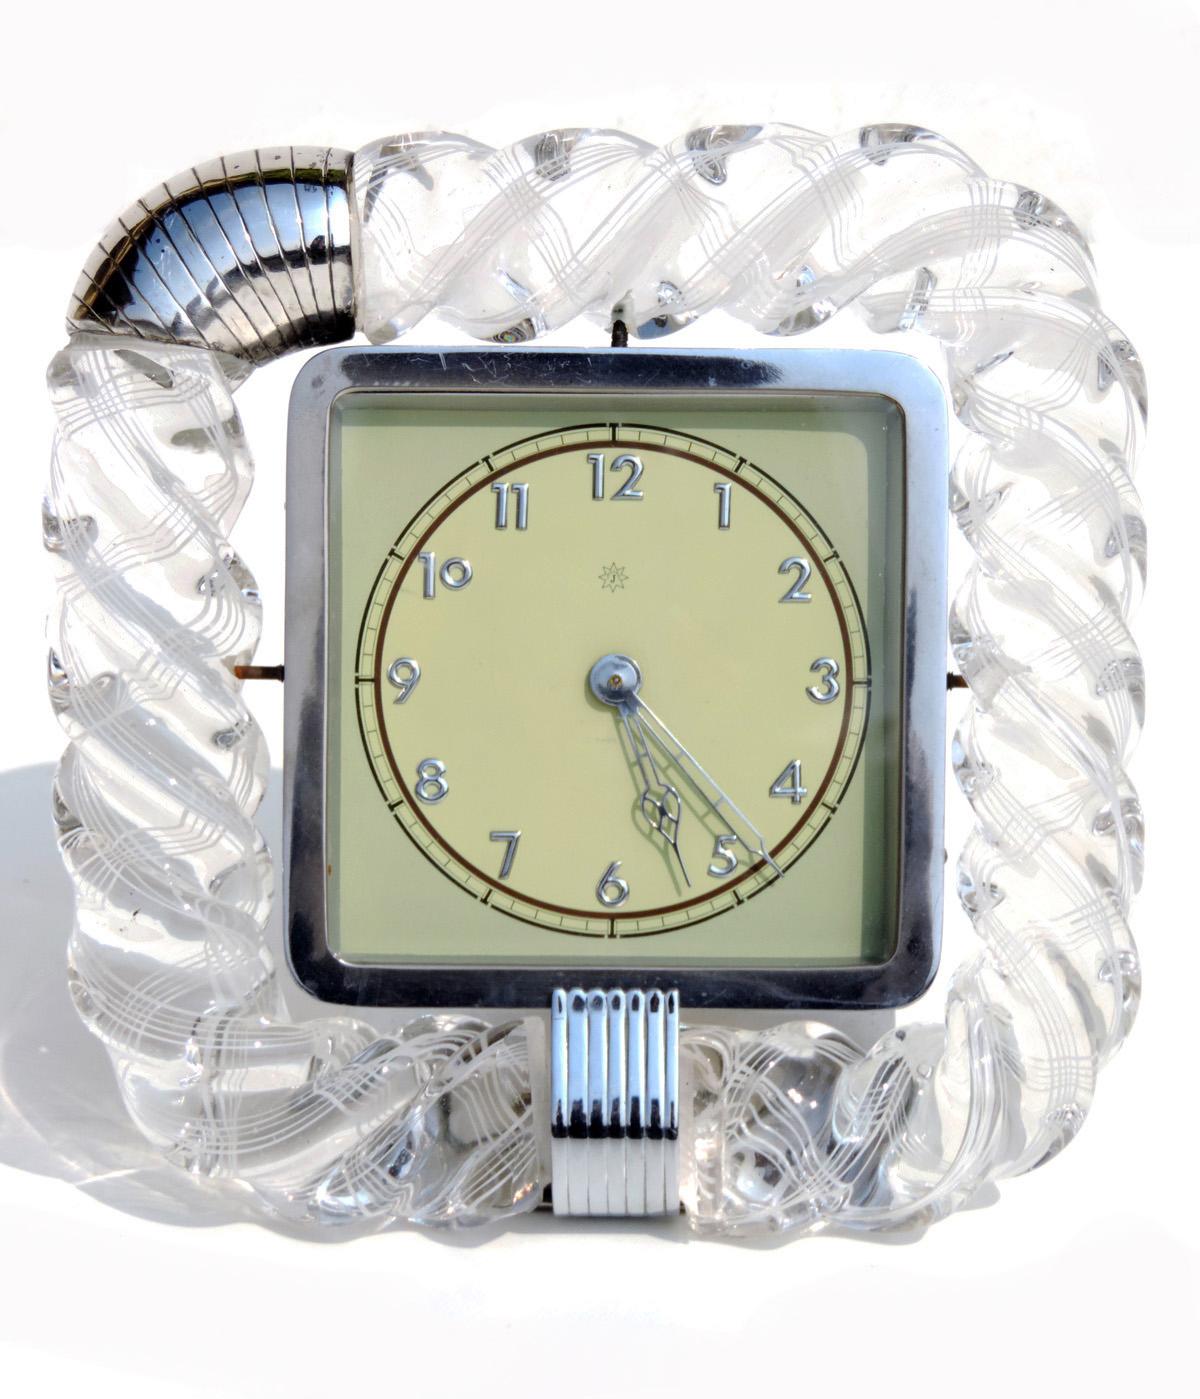 Twisted murano glass frame with silver detail.
Junghans hand-wound watch.
Nickel brass base.
Perfect working order.
Perfect condition.